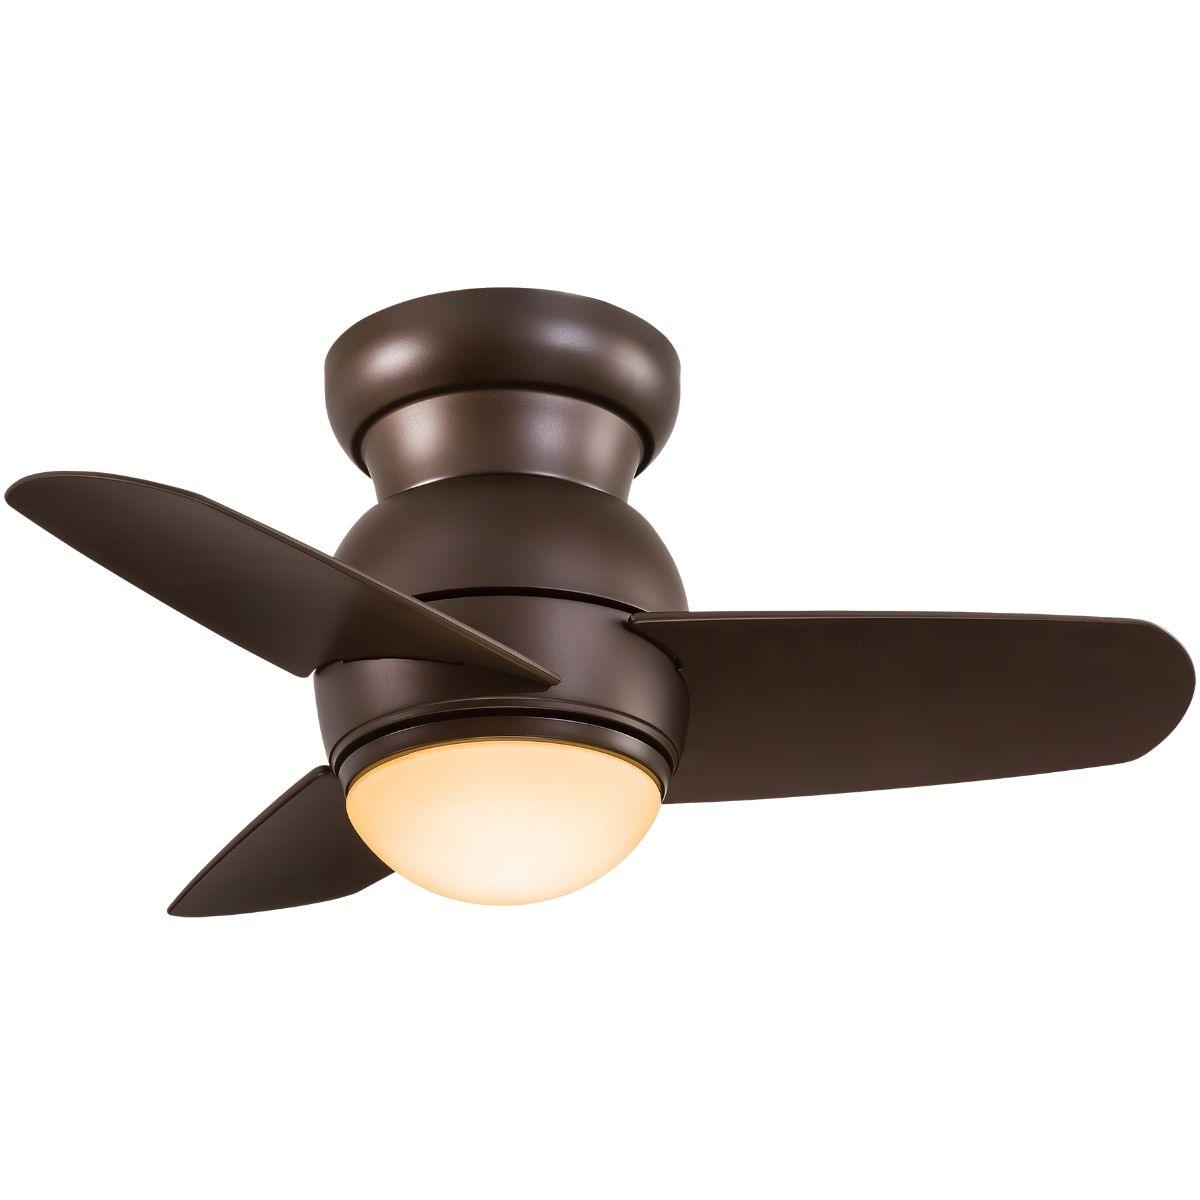 Spacesaver 26 Inch Modern Hugger Ceiling Fan With Light, Wall Control Included